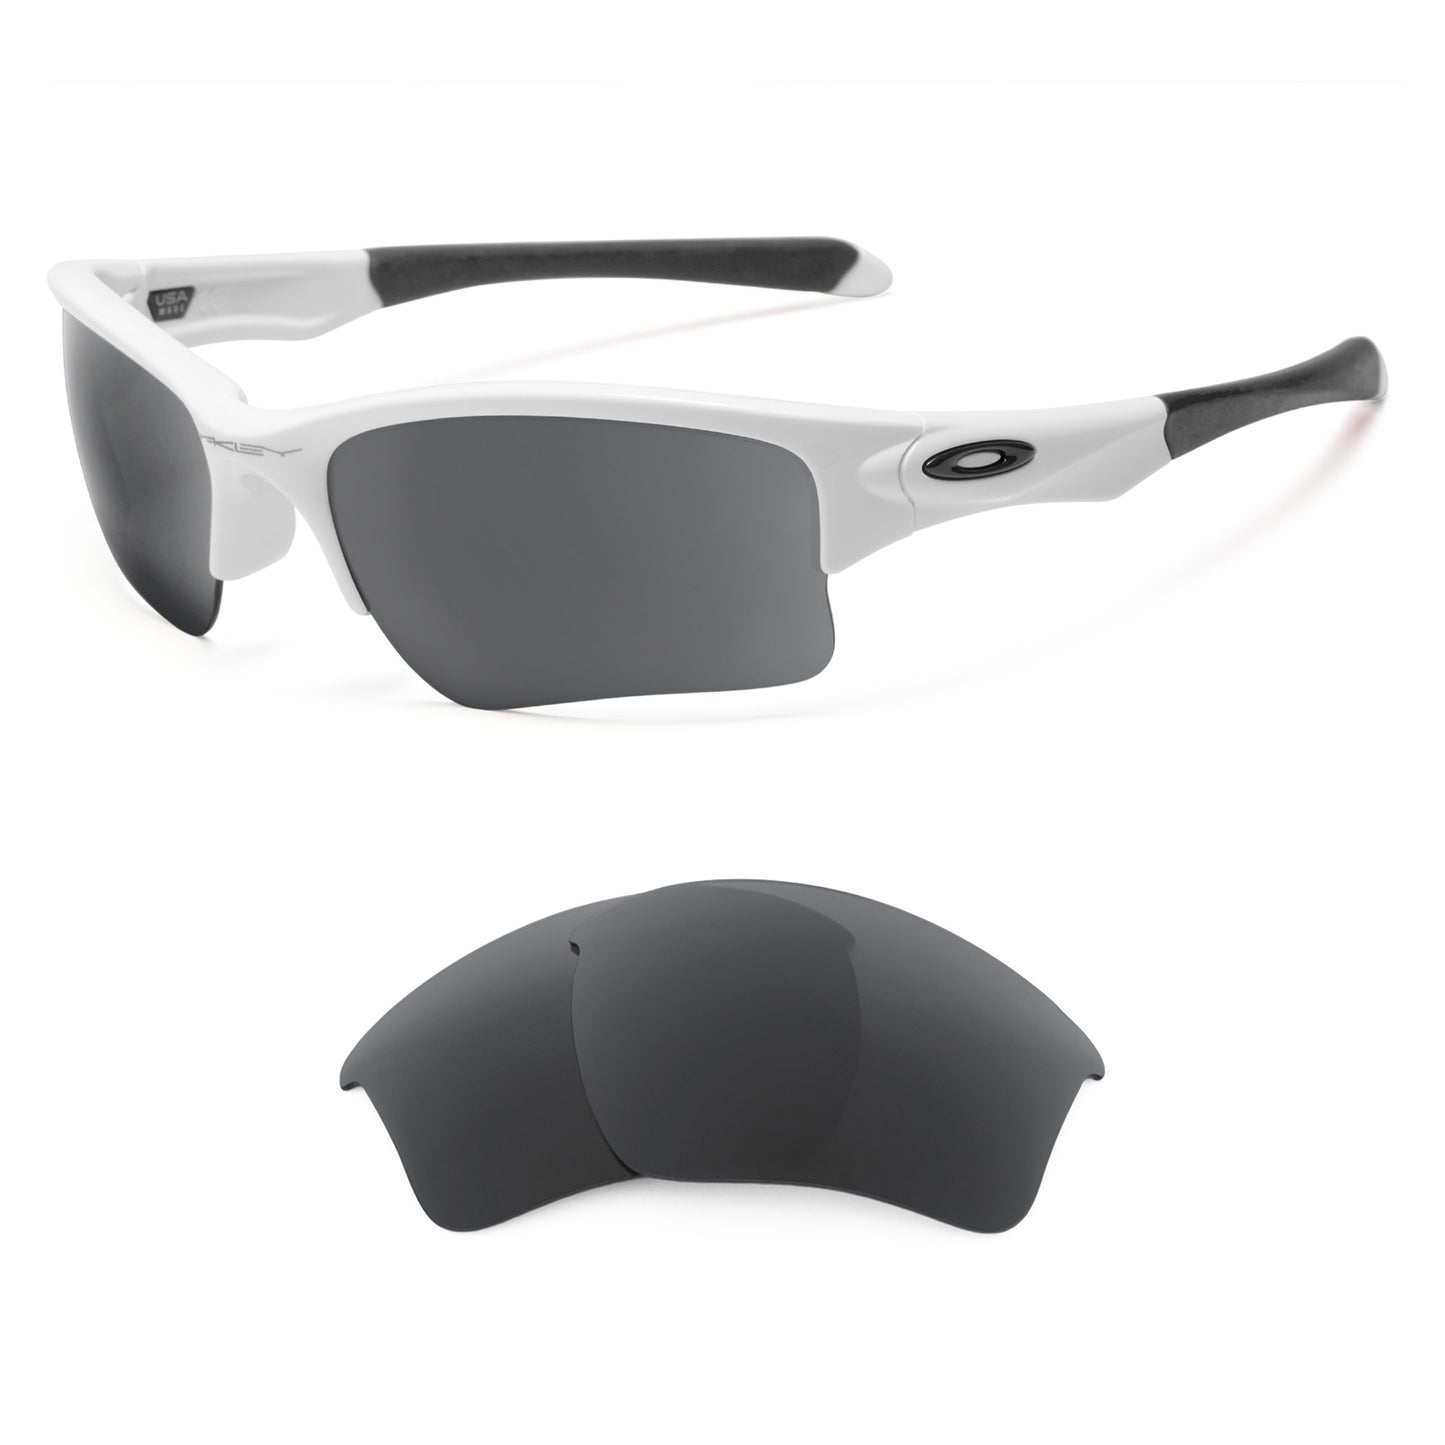 Oakley Quarter Jacket sunglasses with replacement lenses